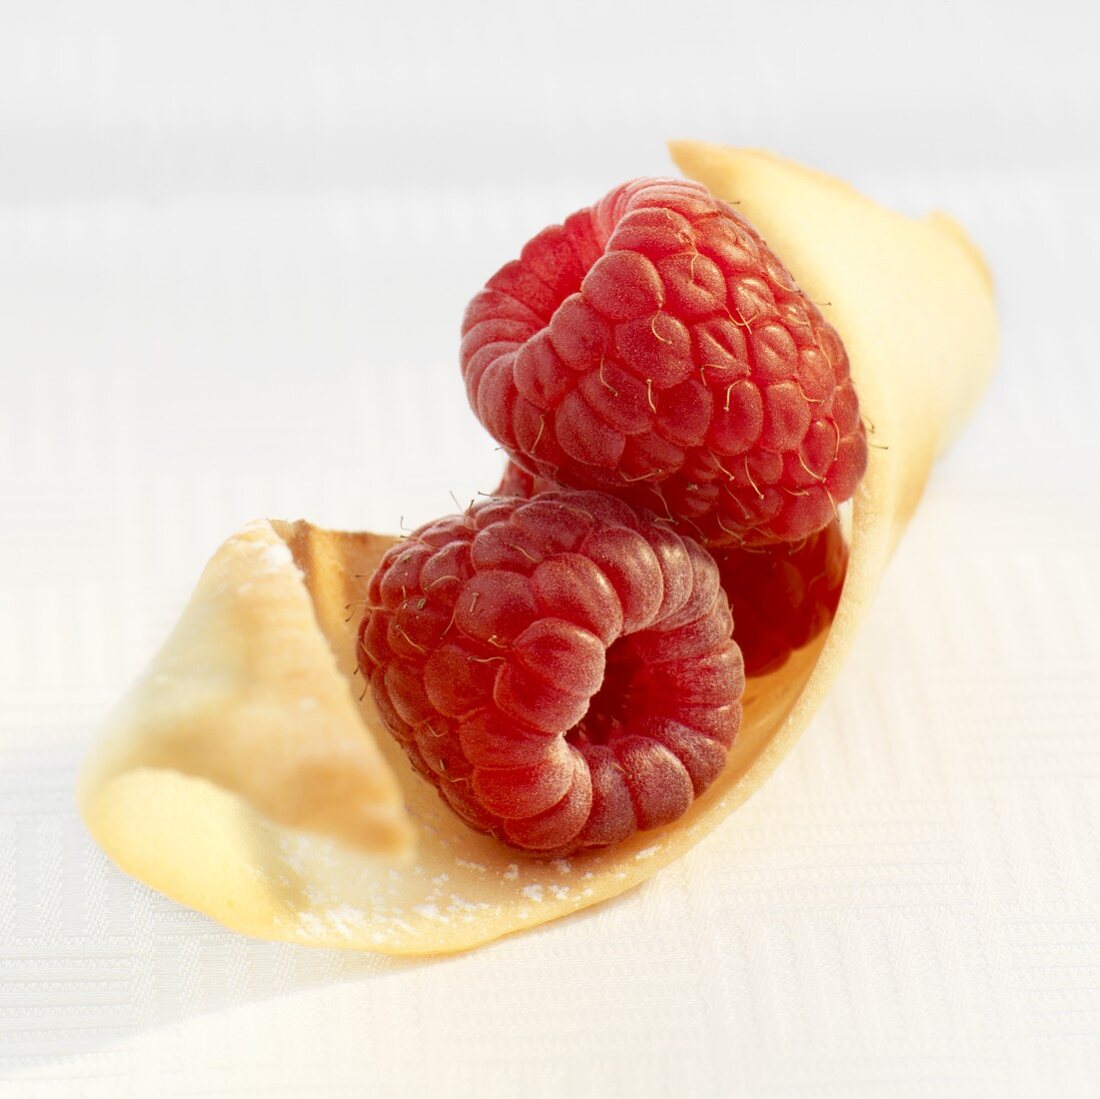 Two raspberries on wafer (close-up)